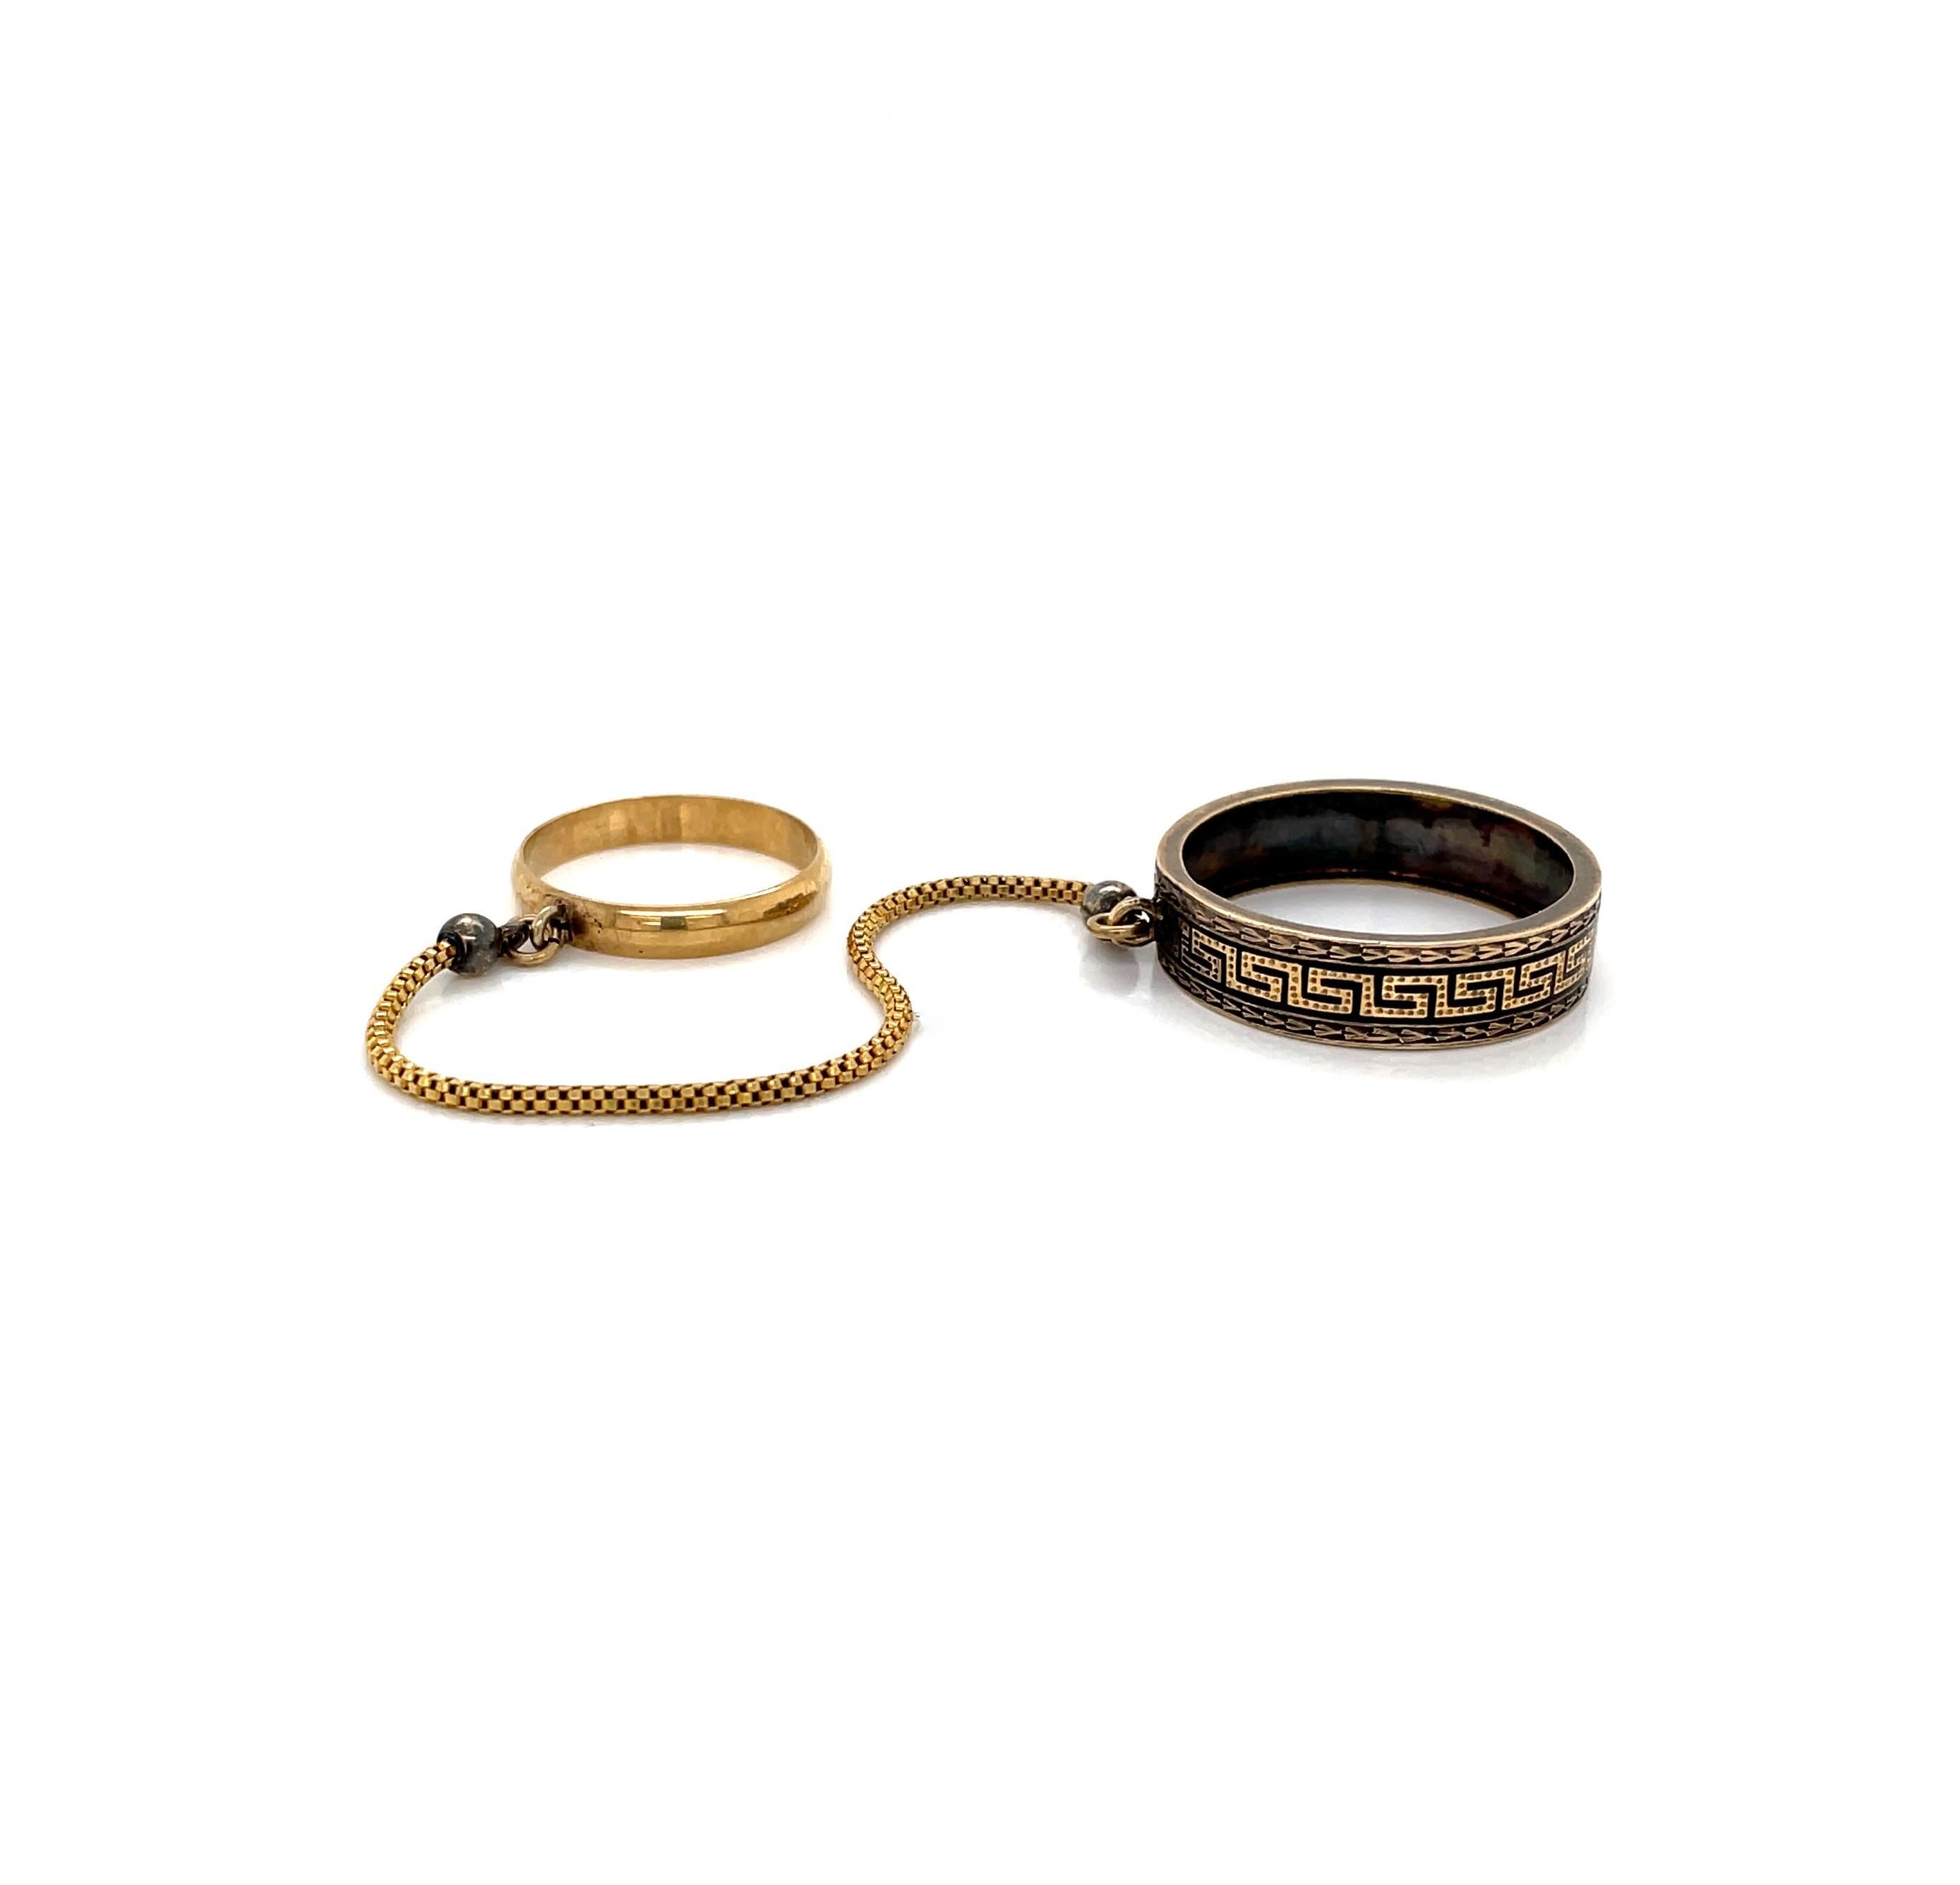 For an exotic look, a decorative 5.8mm band of gold with a engraved Greek design accented by black enamel anchors this ring pair from the middle finger, in size 10-1/4. As if handcuffed, a three inch 1.40mm round Venetian 14 karat gold chain